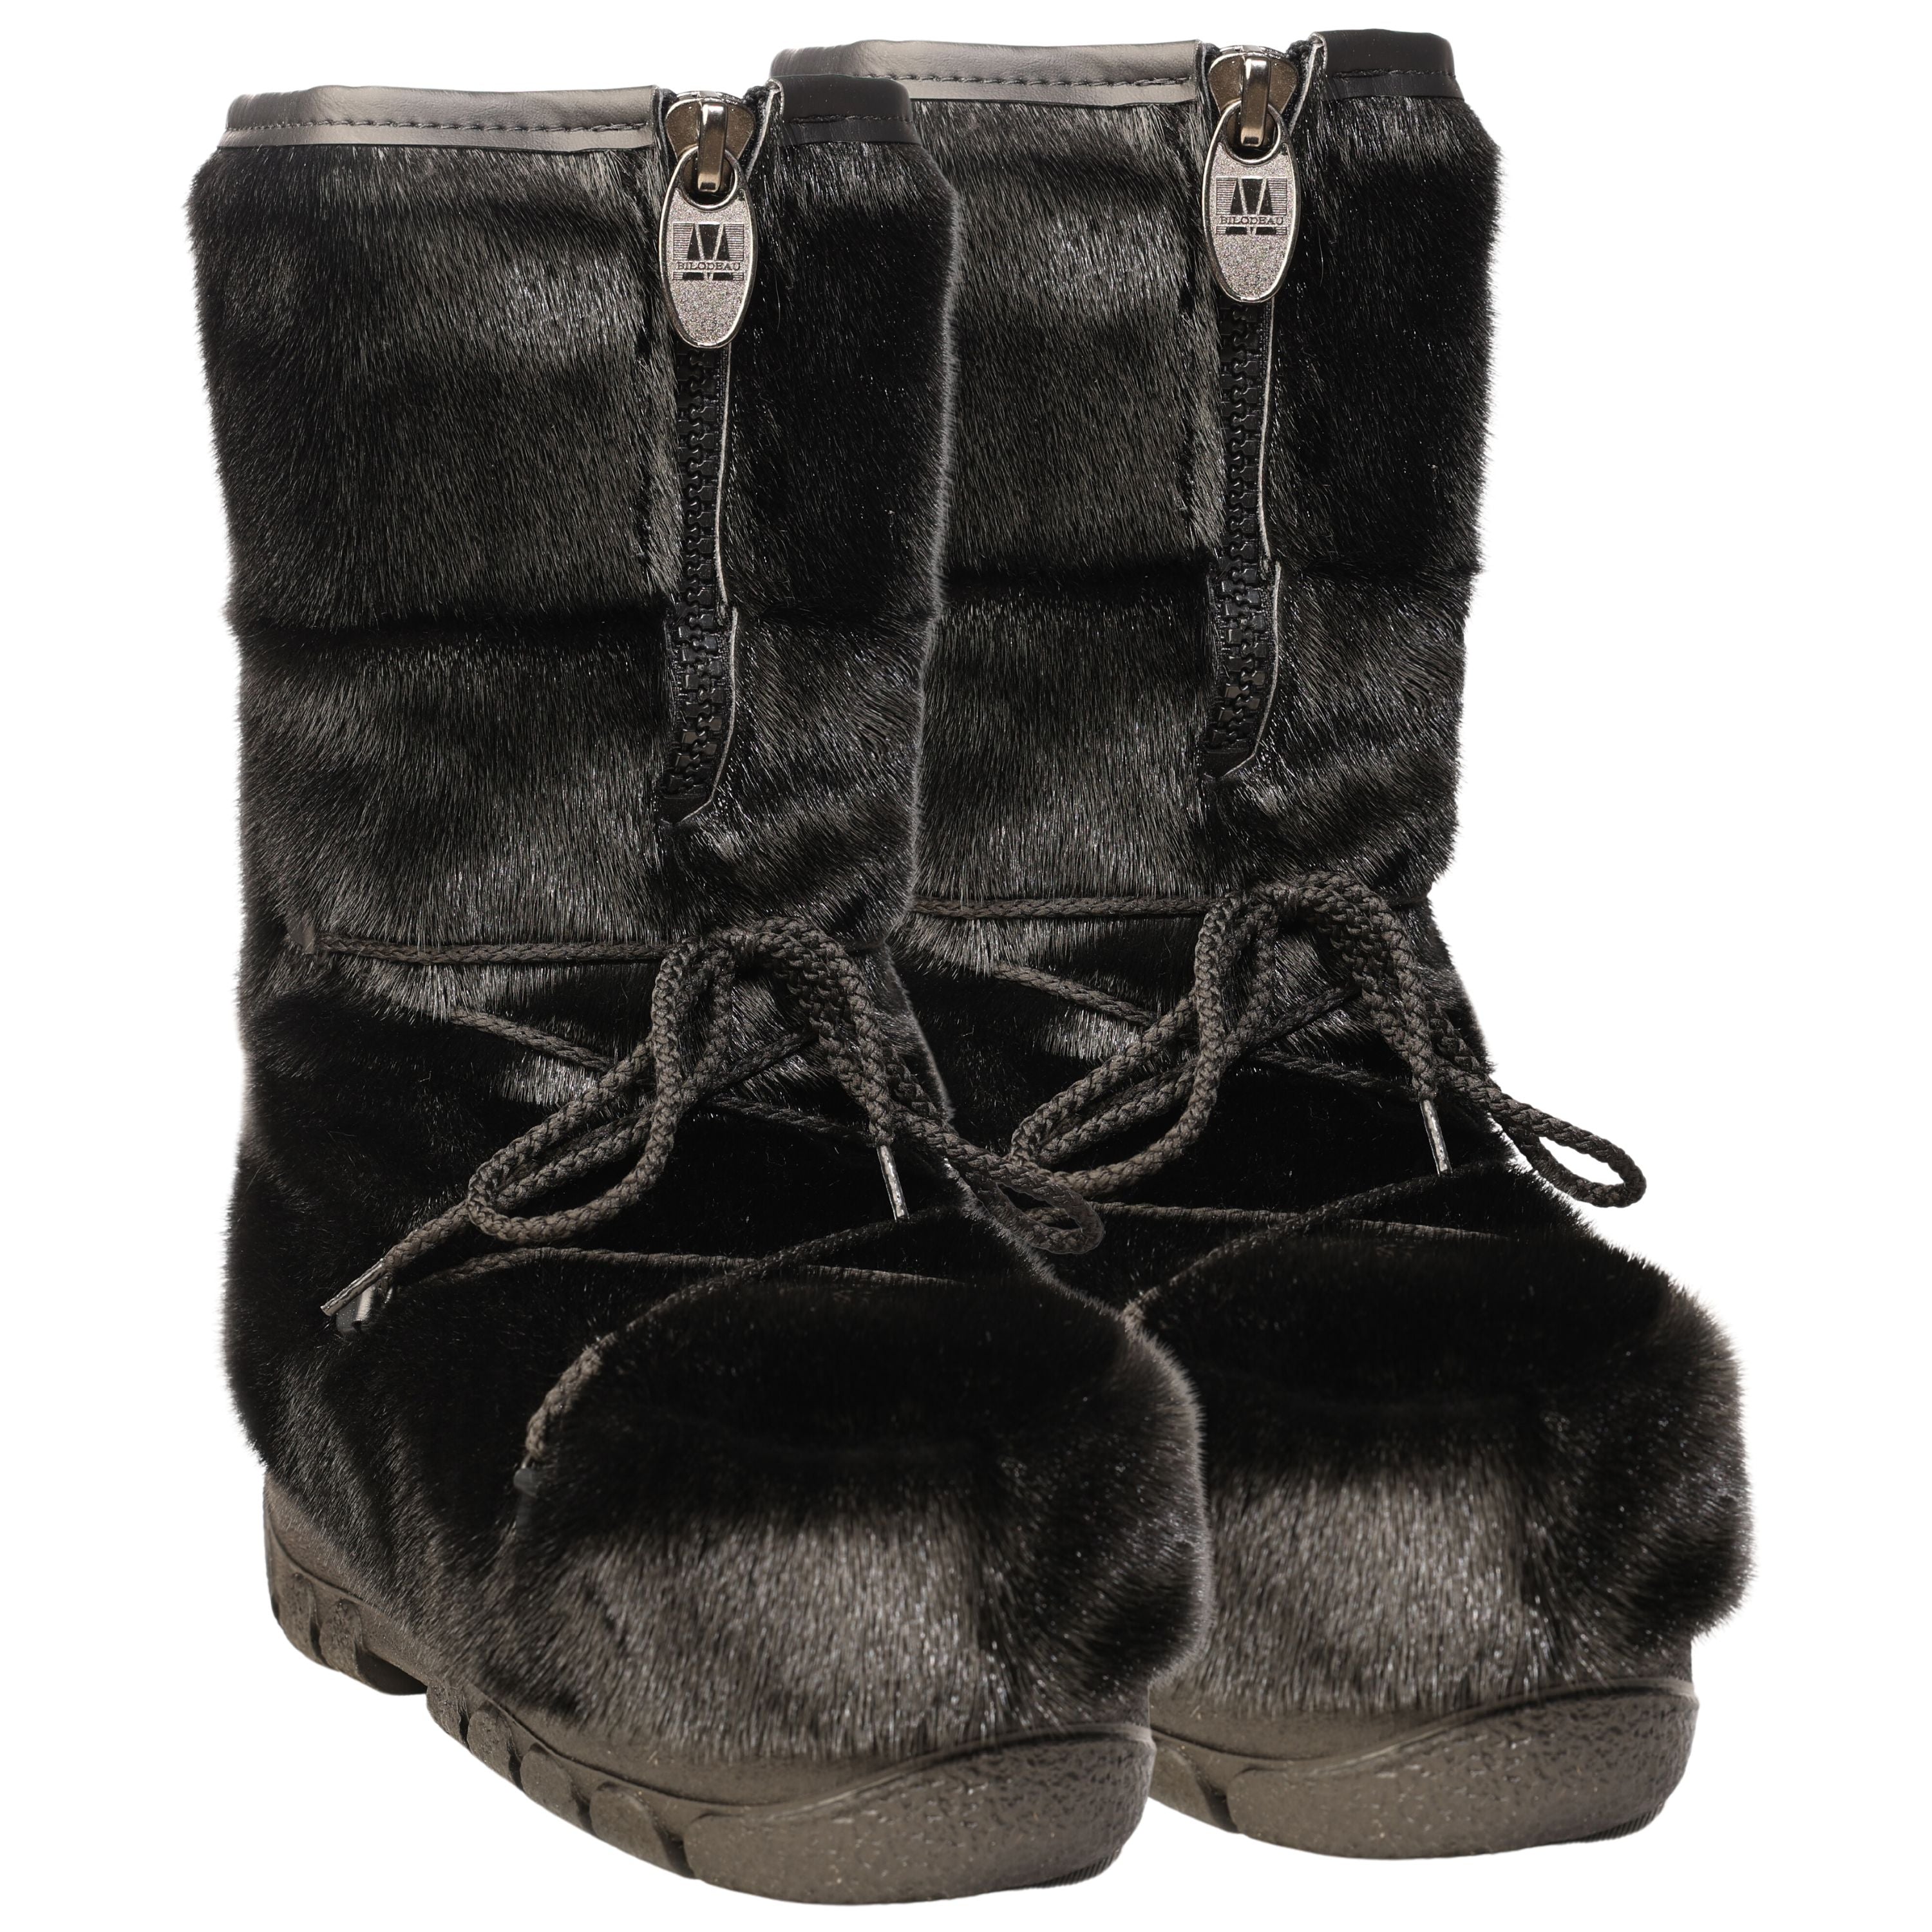 "Checked style" Seal fur boots - Men’s